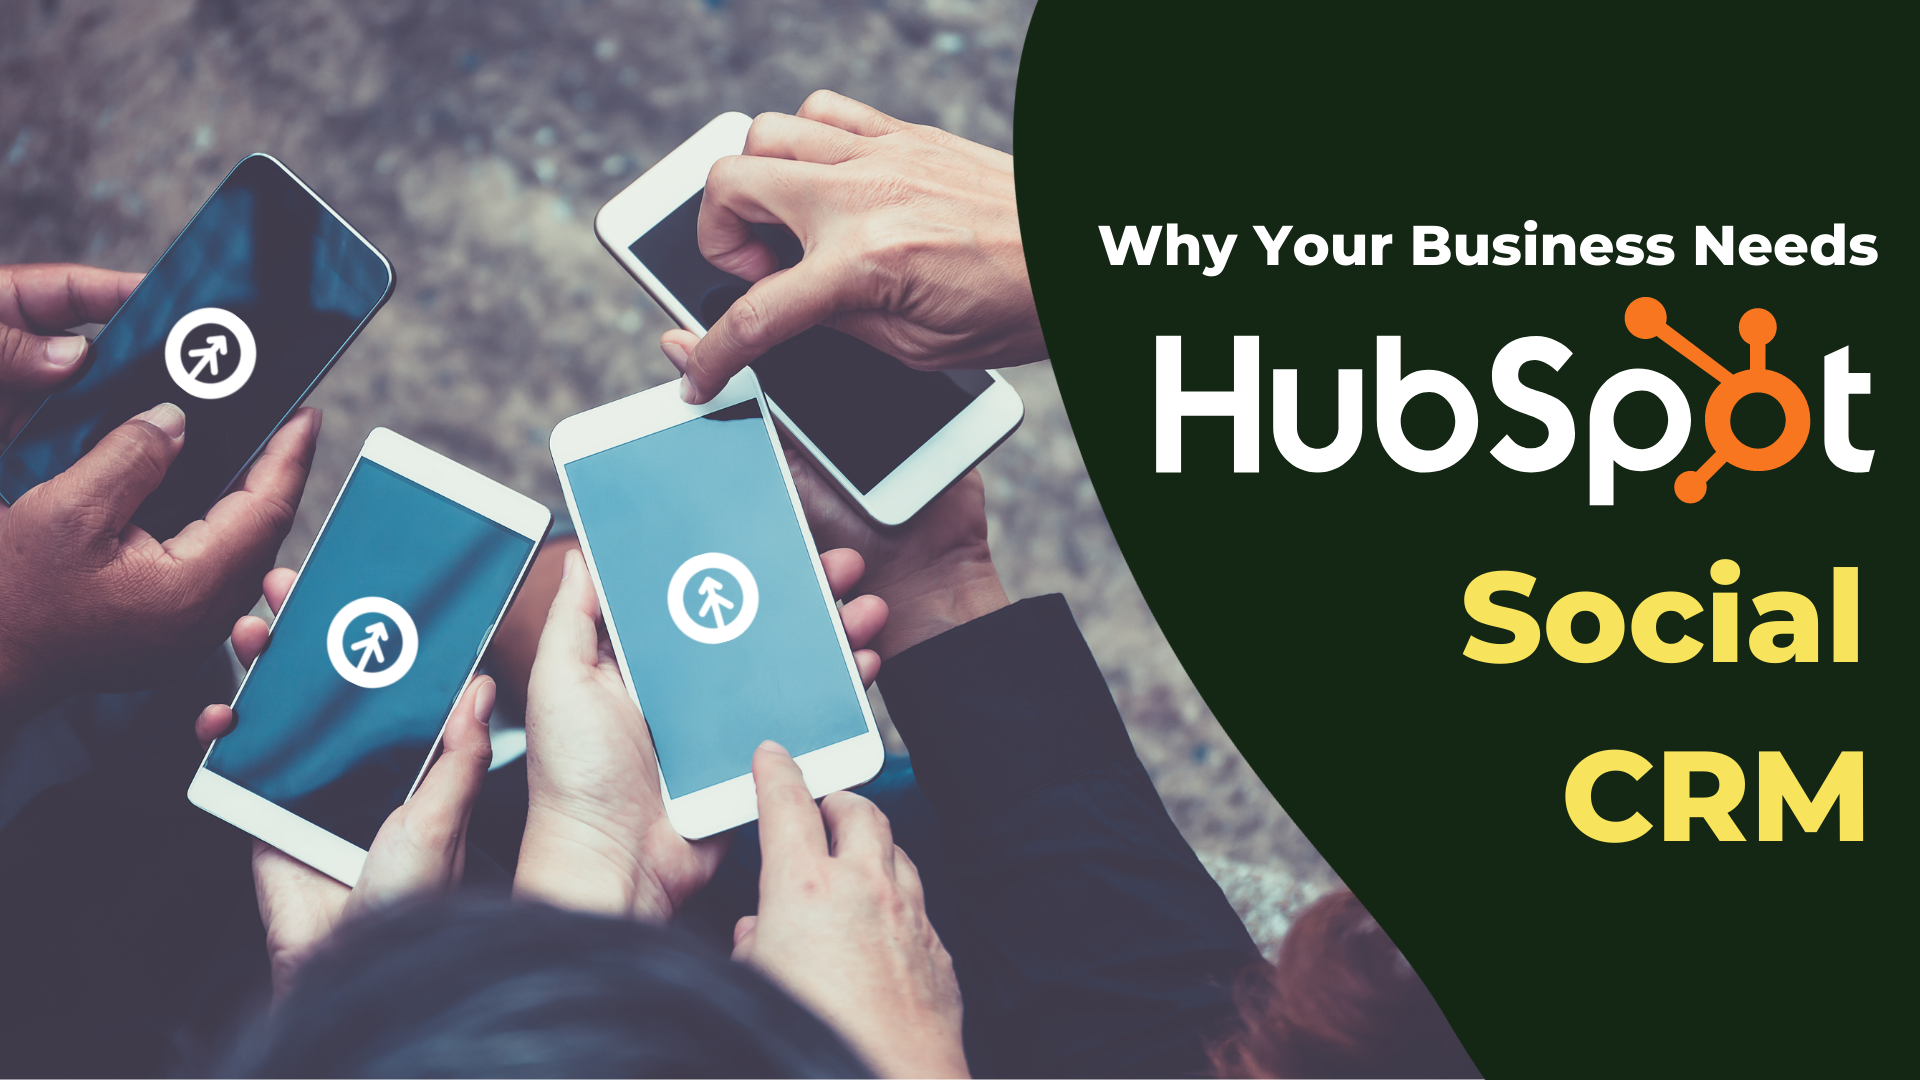 Why Your Business Needs HubSpot’s Social CRM